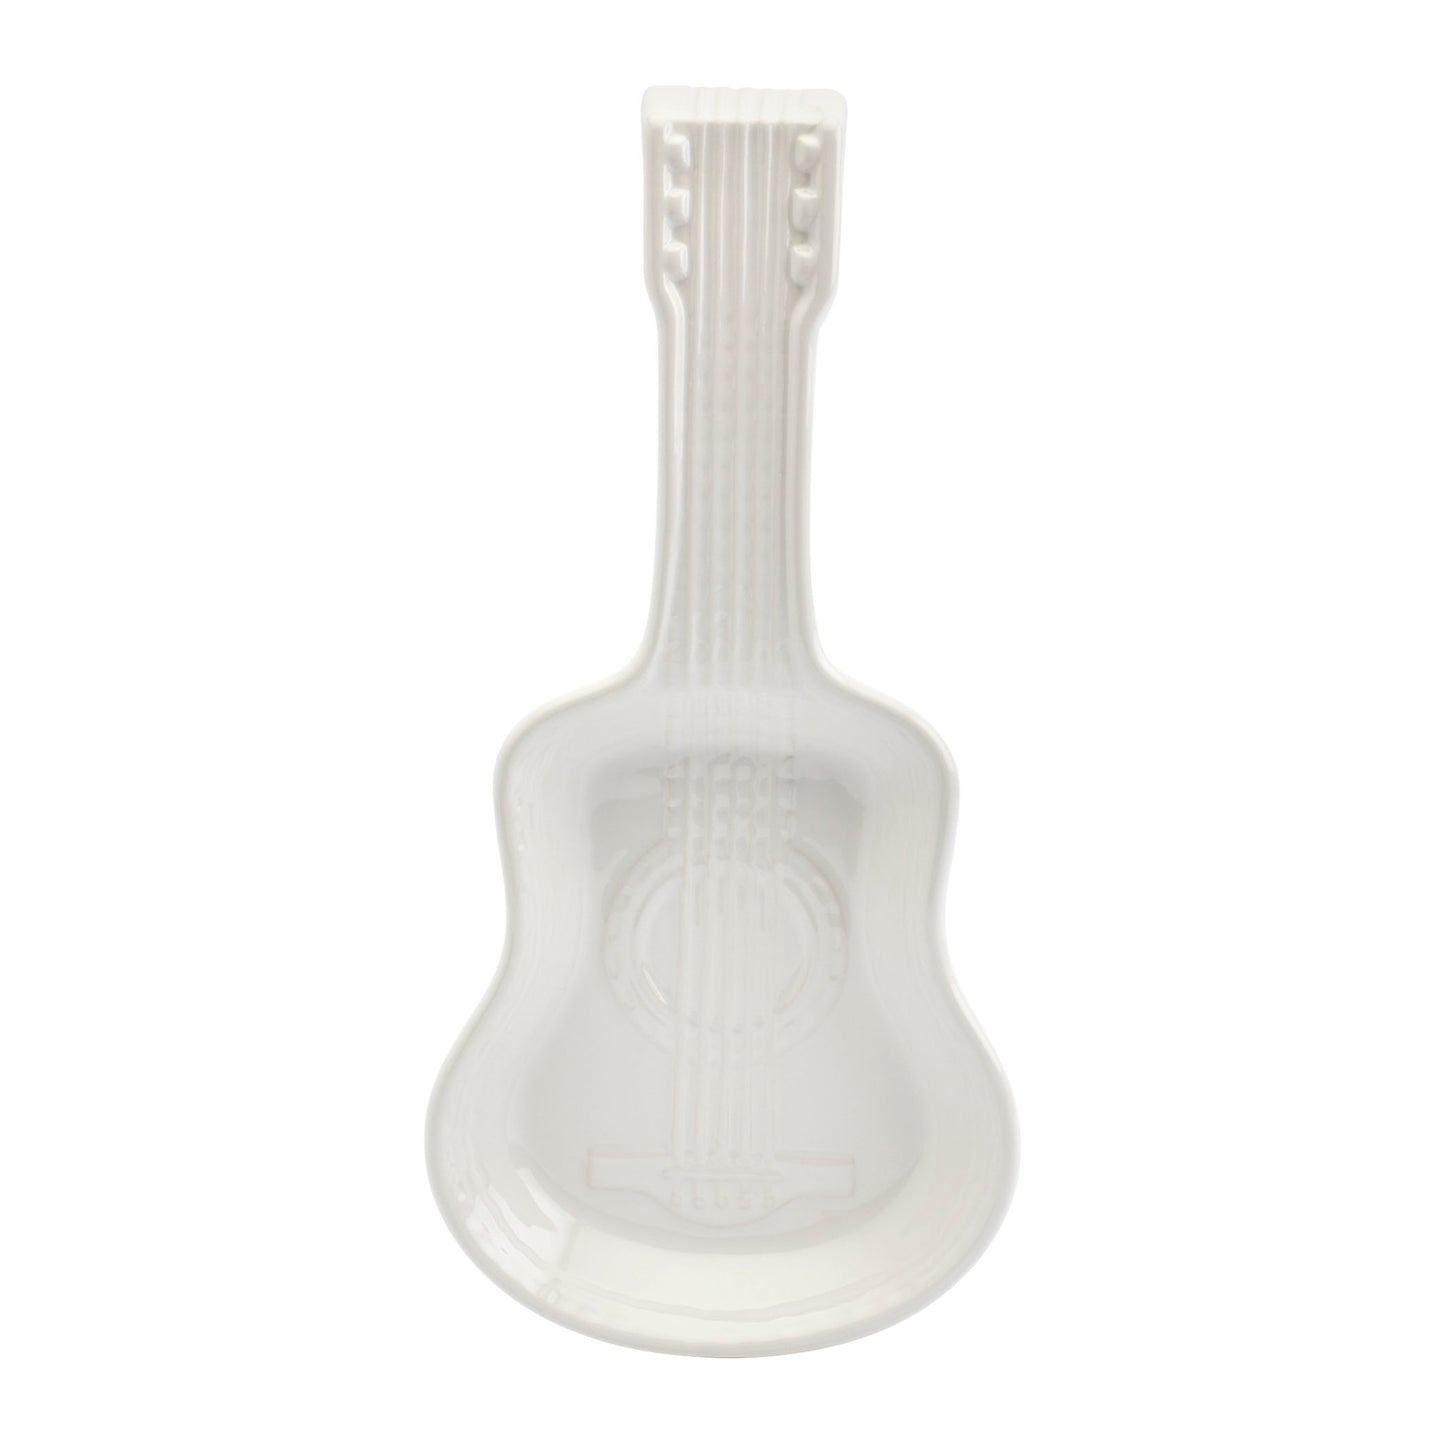 Dolly 3D Guitar Spoon Rest - White